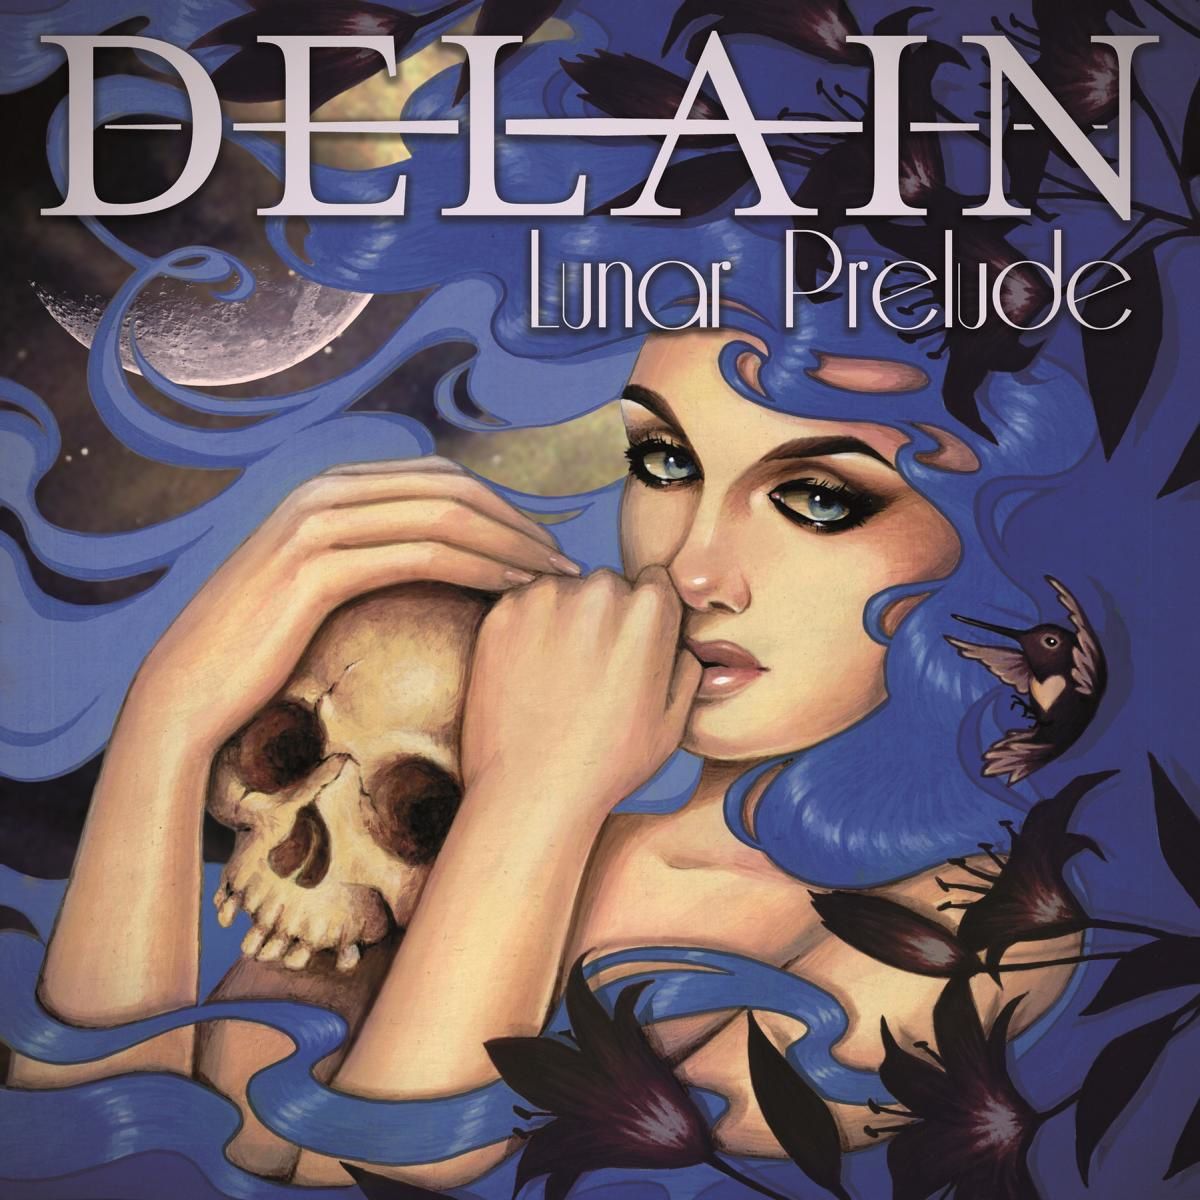 DELAIN unveils details of the upcoming EP